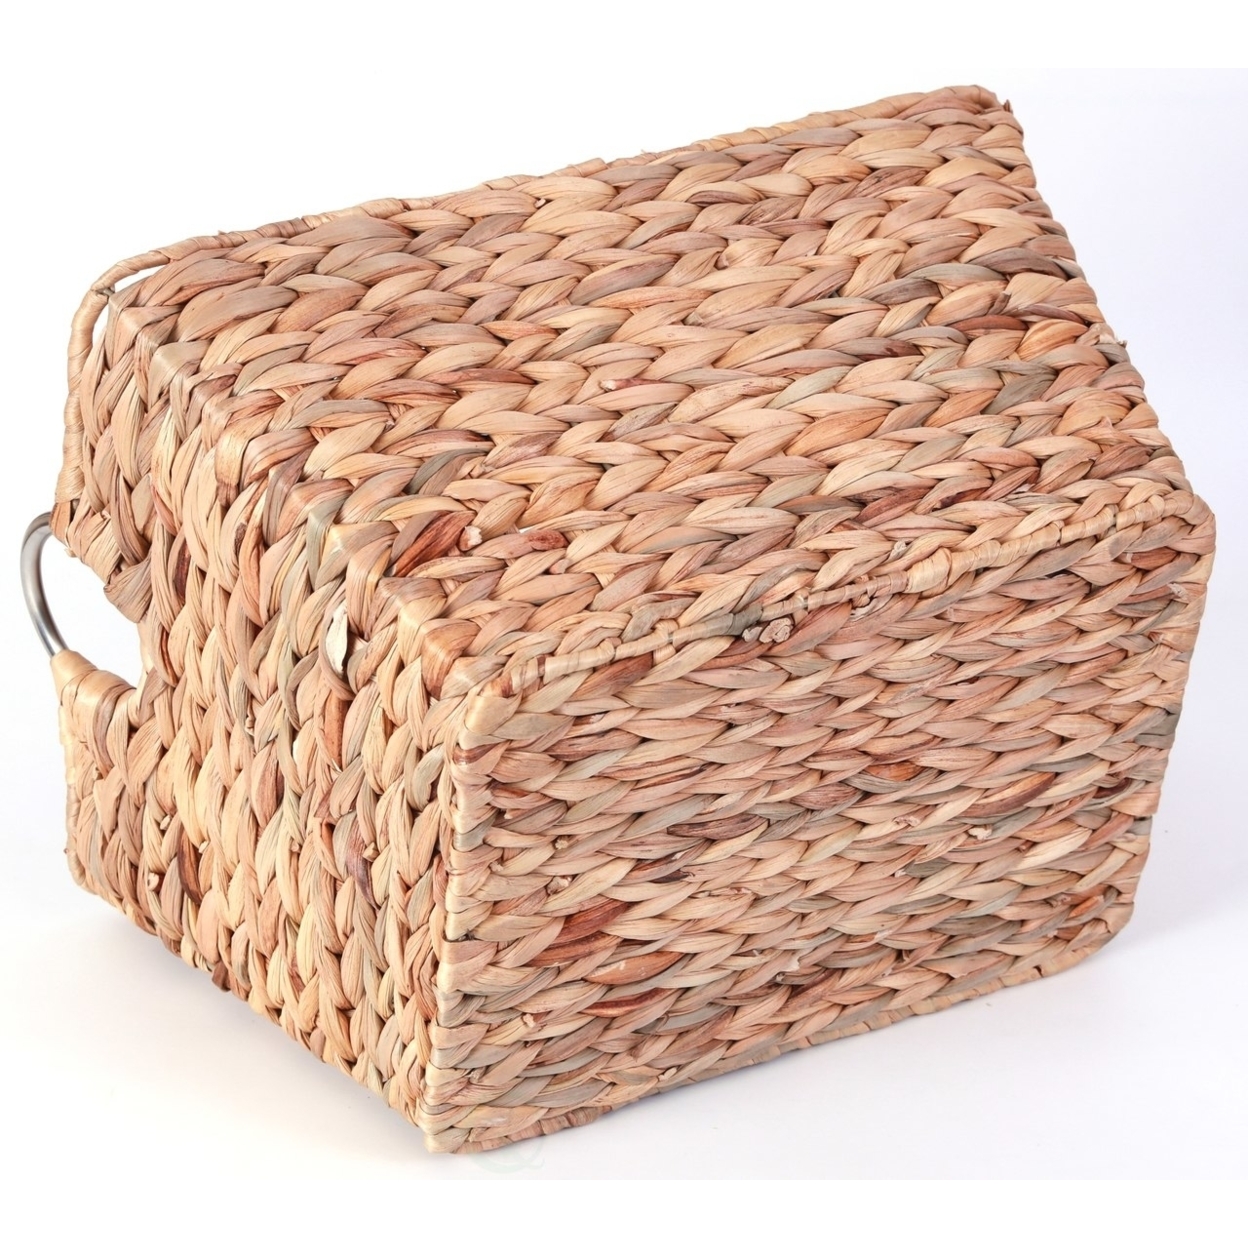 Large Square Water Hyacinth Wicker Laundry Basket